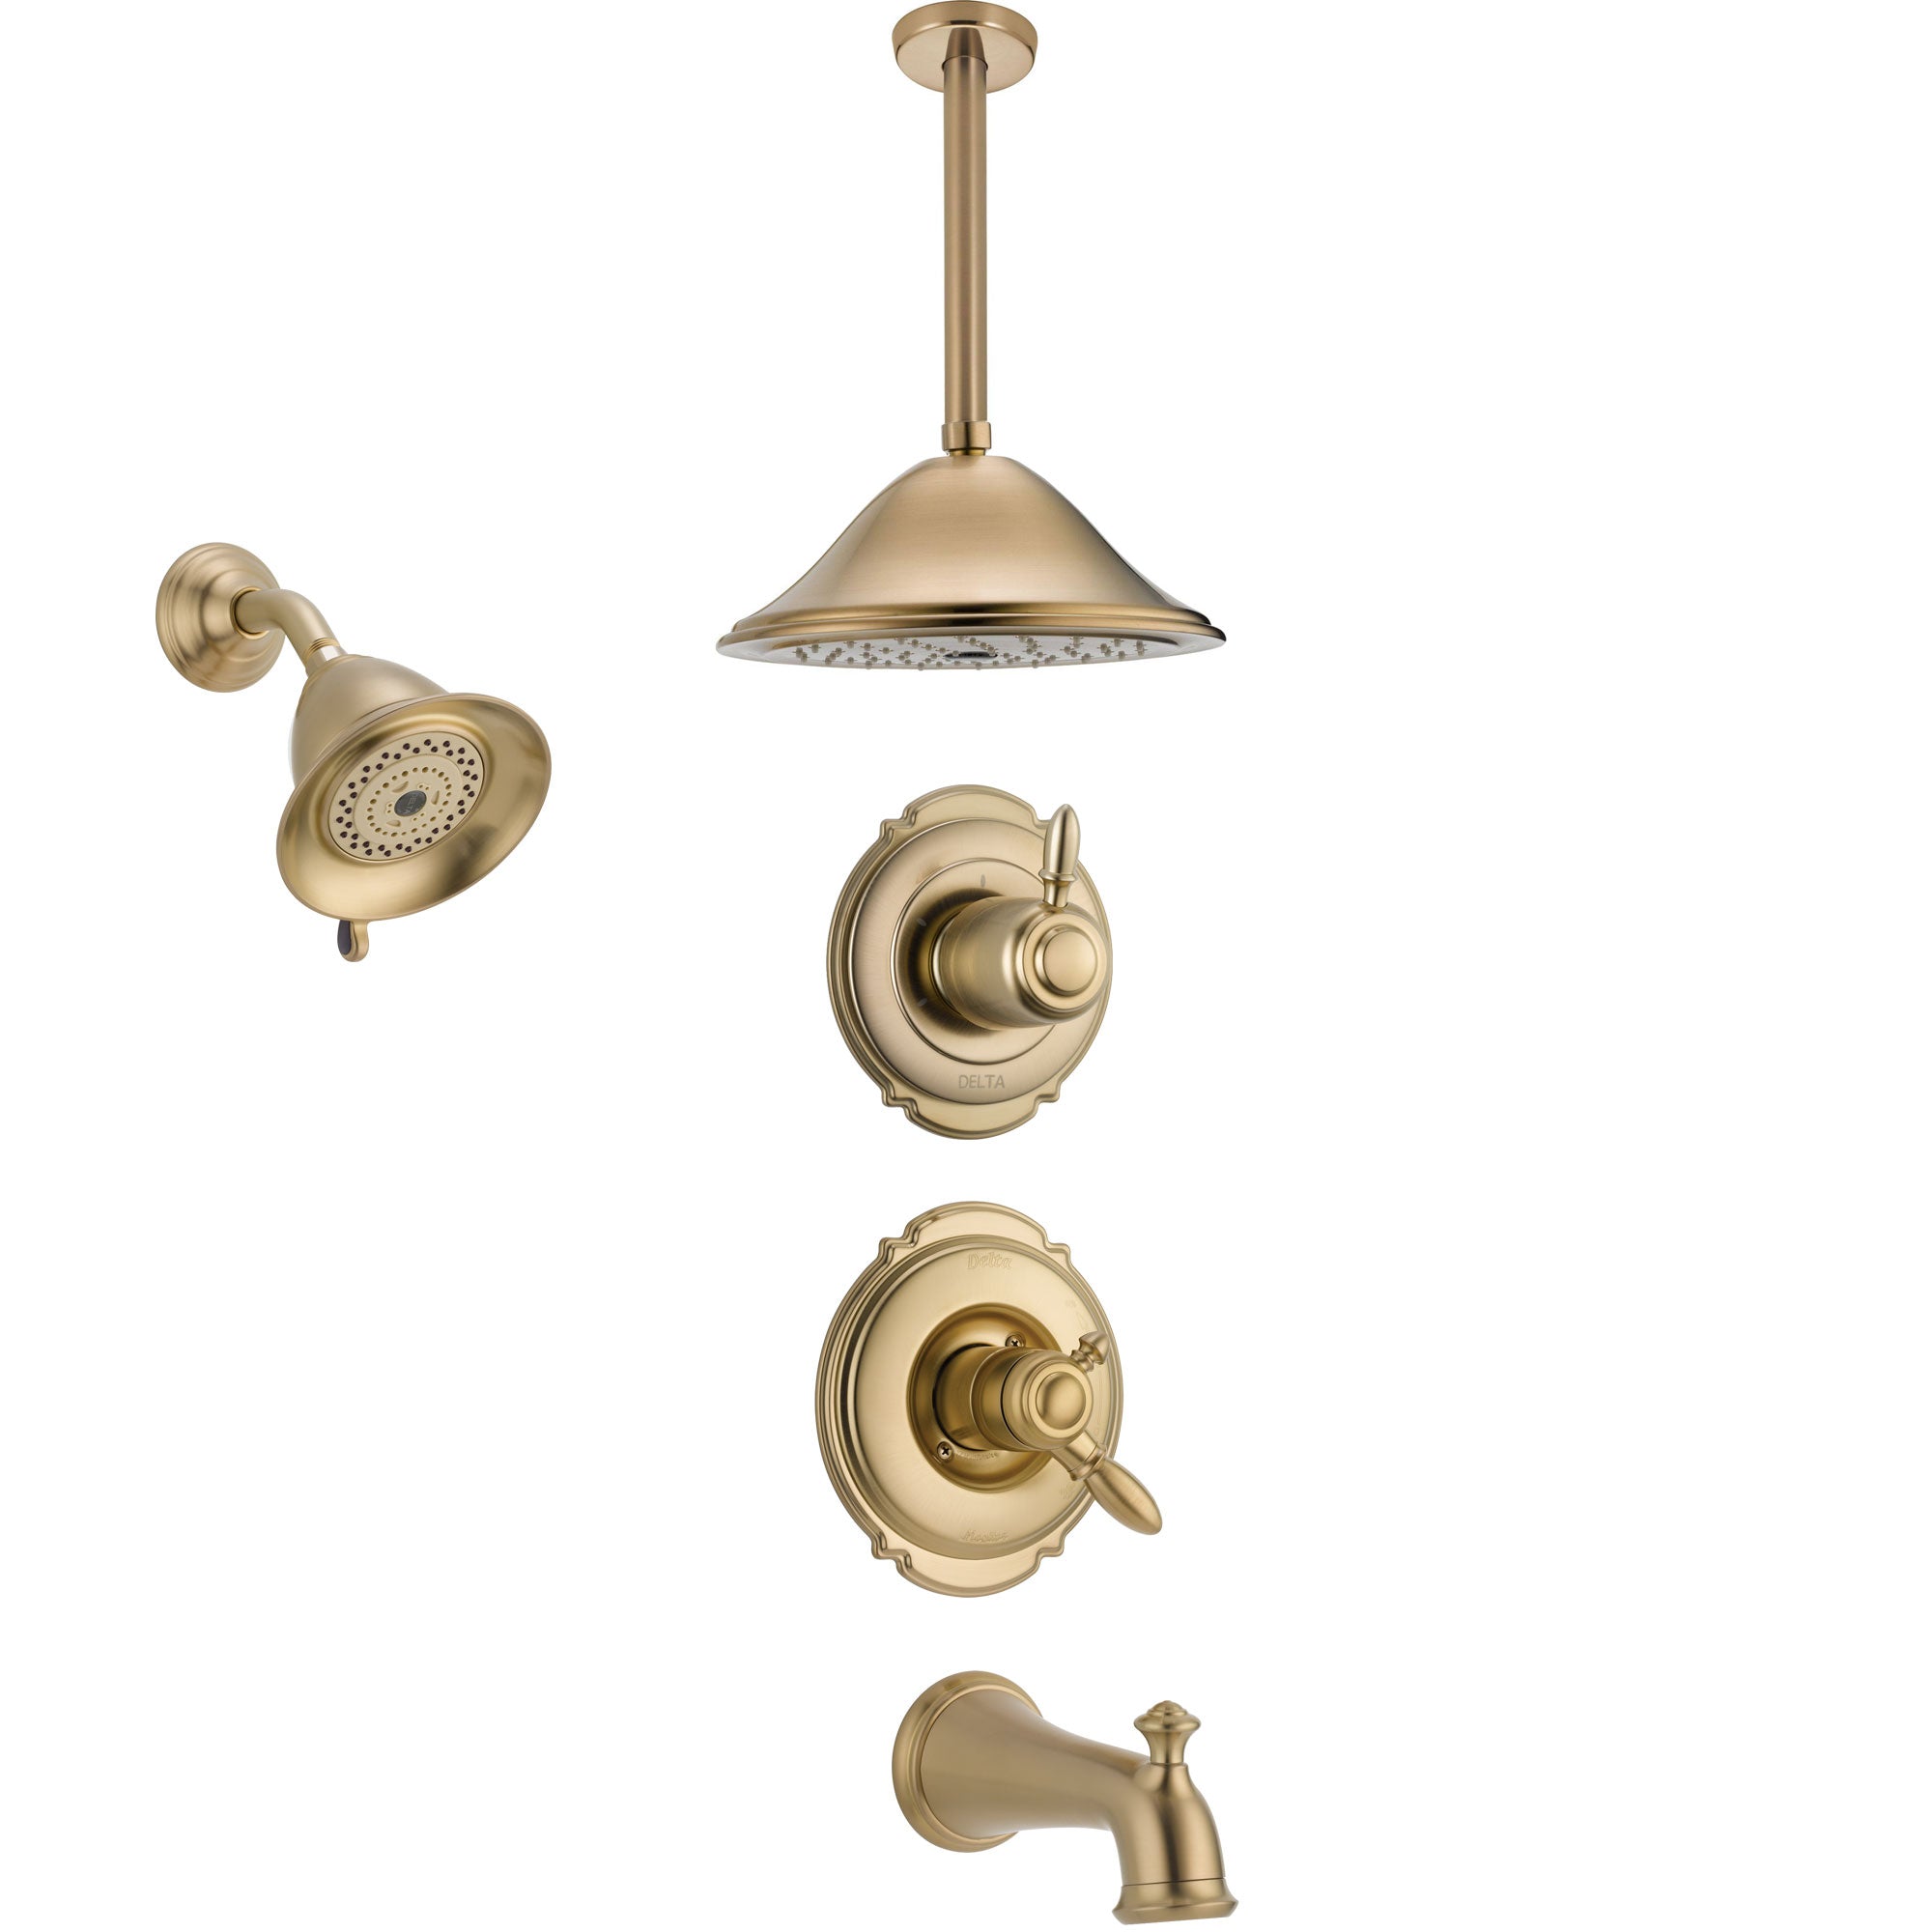 Delta Victorian Champagne Bronze Tub and Shower System with Dual Control Handle, Diverter, Showerhead, and Ceiling Mount Showerhead SS17455CZ5